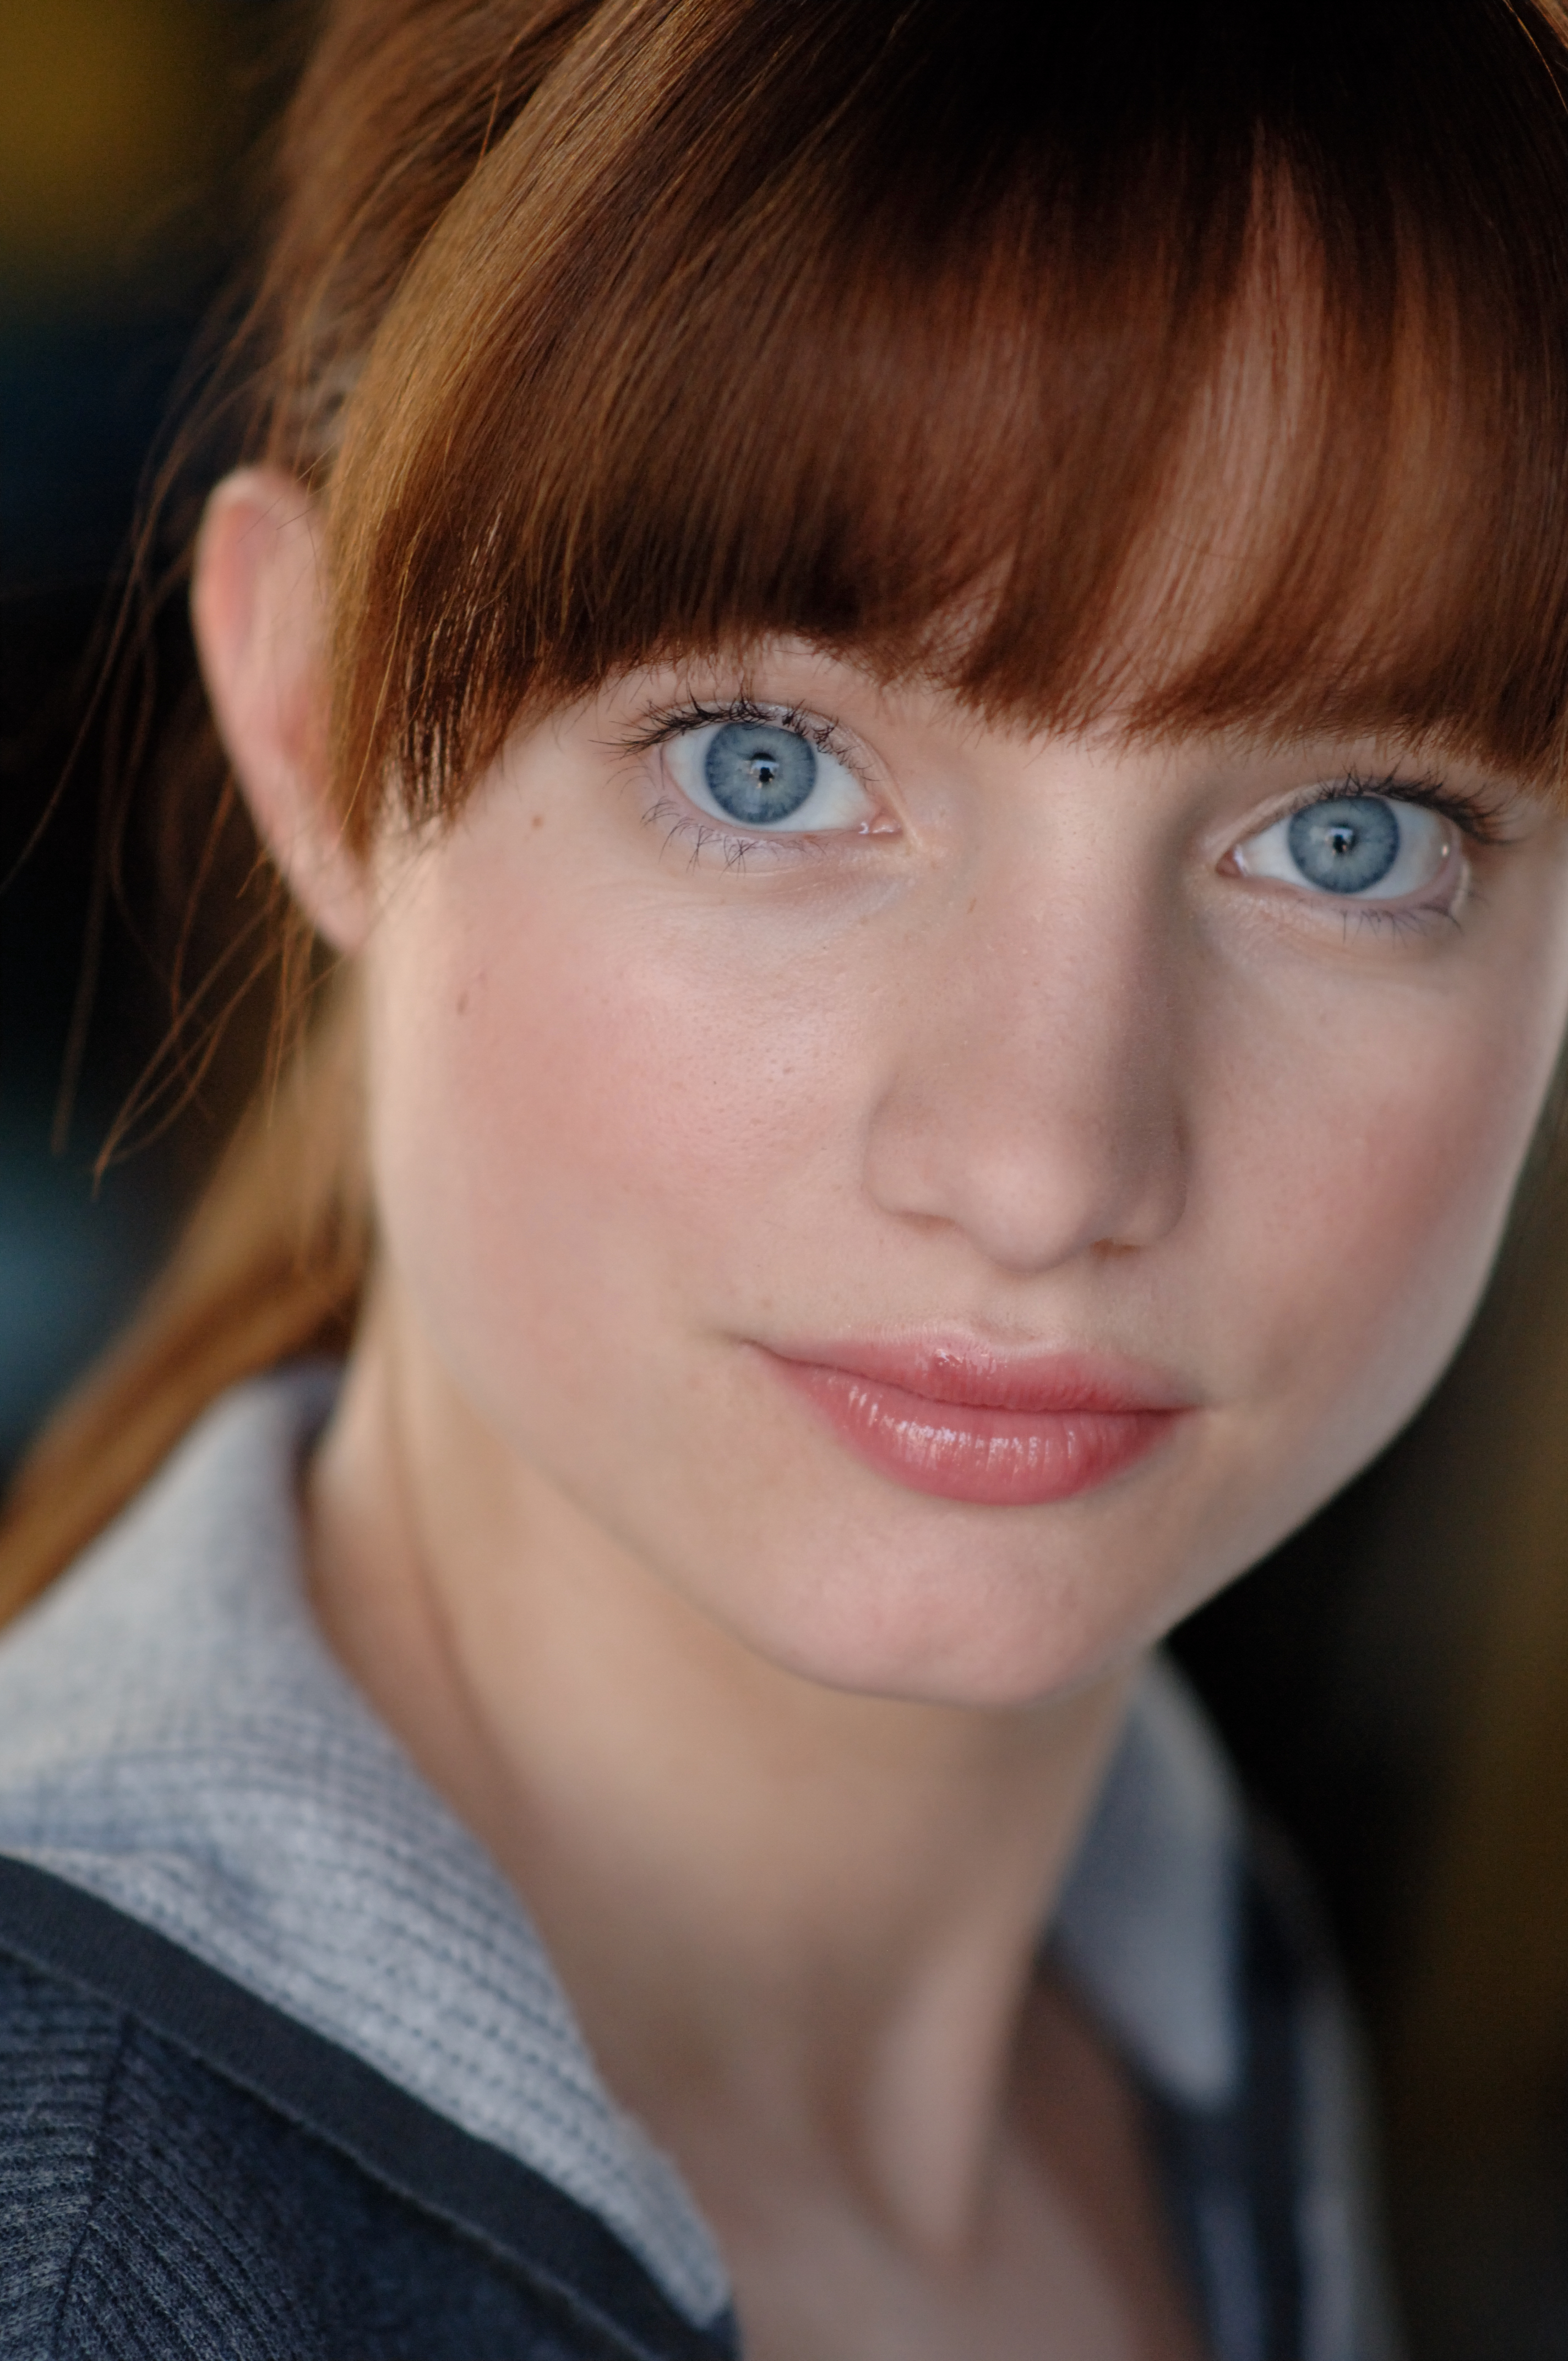 People 2848x4288 Laurence Leboeuf women blue eyes redhead actress portrait display closeup